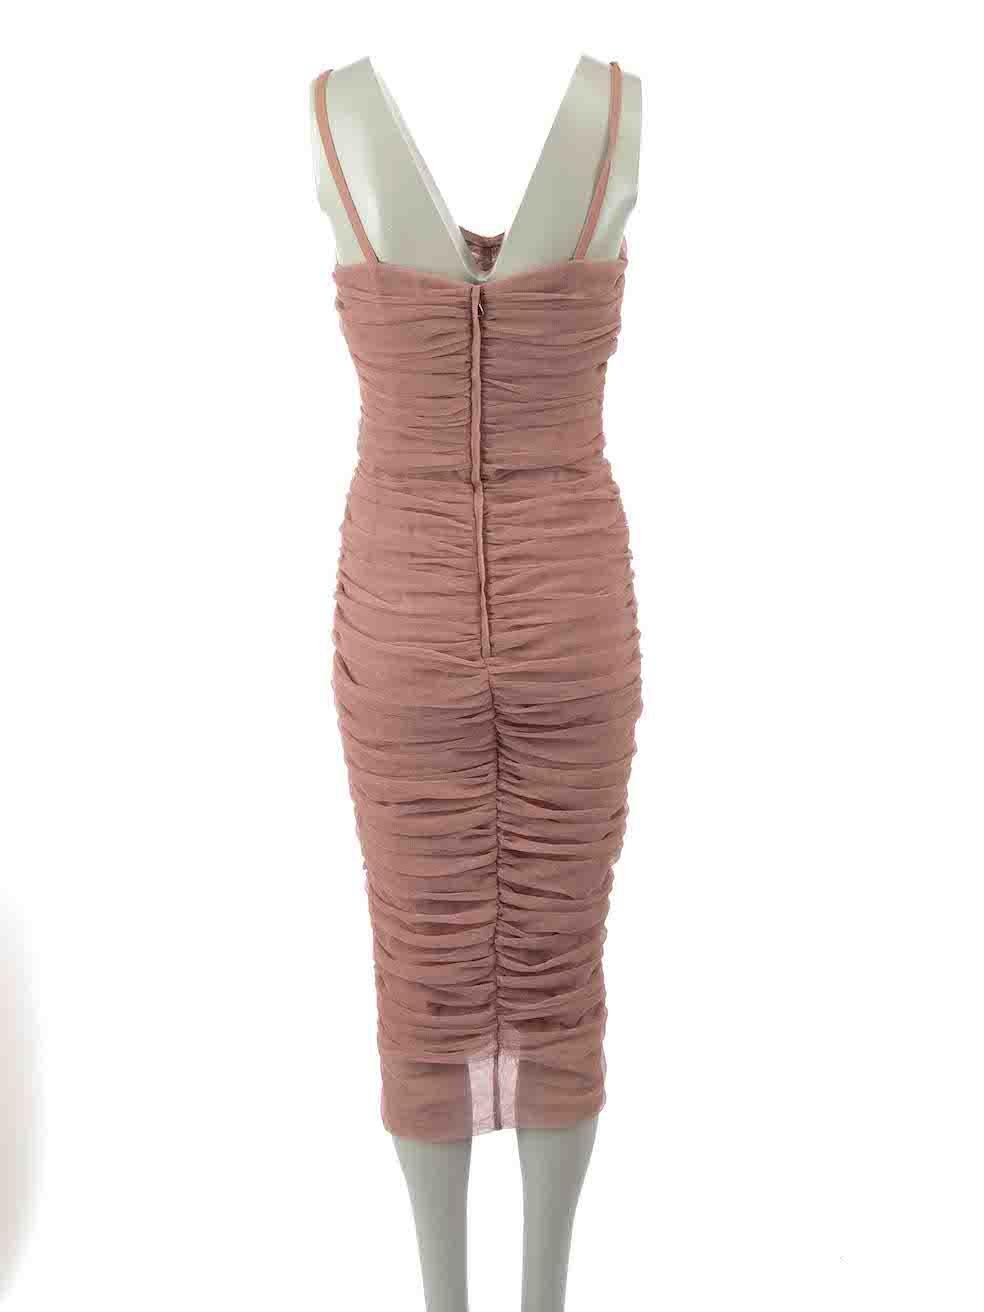 Dolce & Gabbana Pink Mesh Ruched Bodycon Dress Size M In Excellent Condition For Sale In London, GB